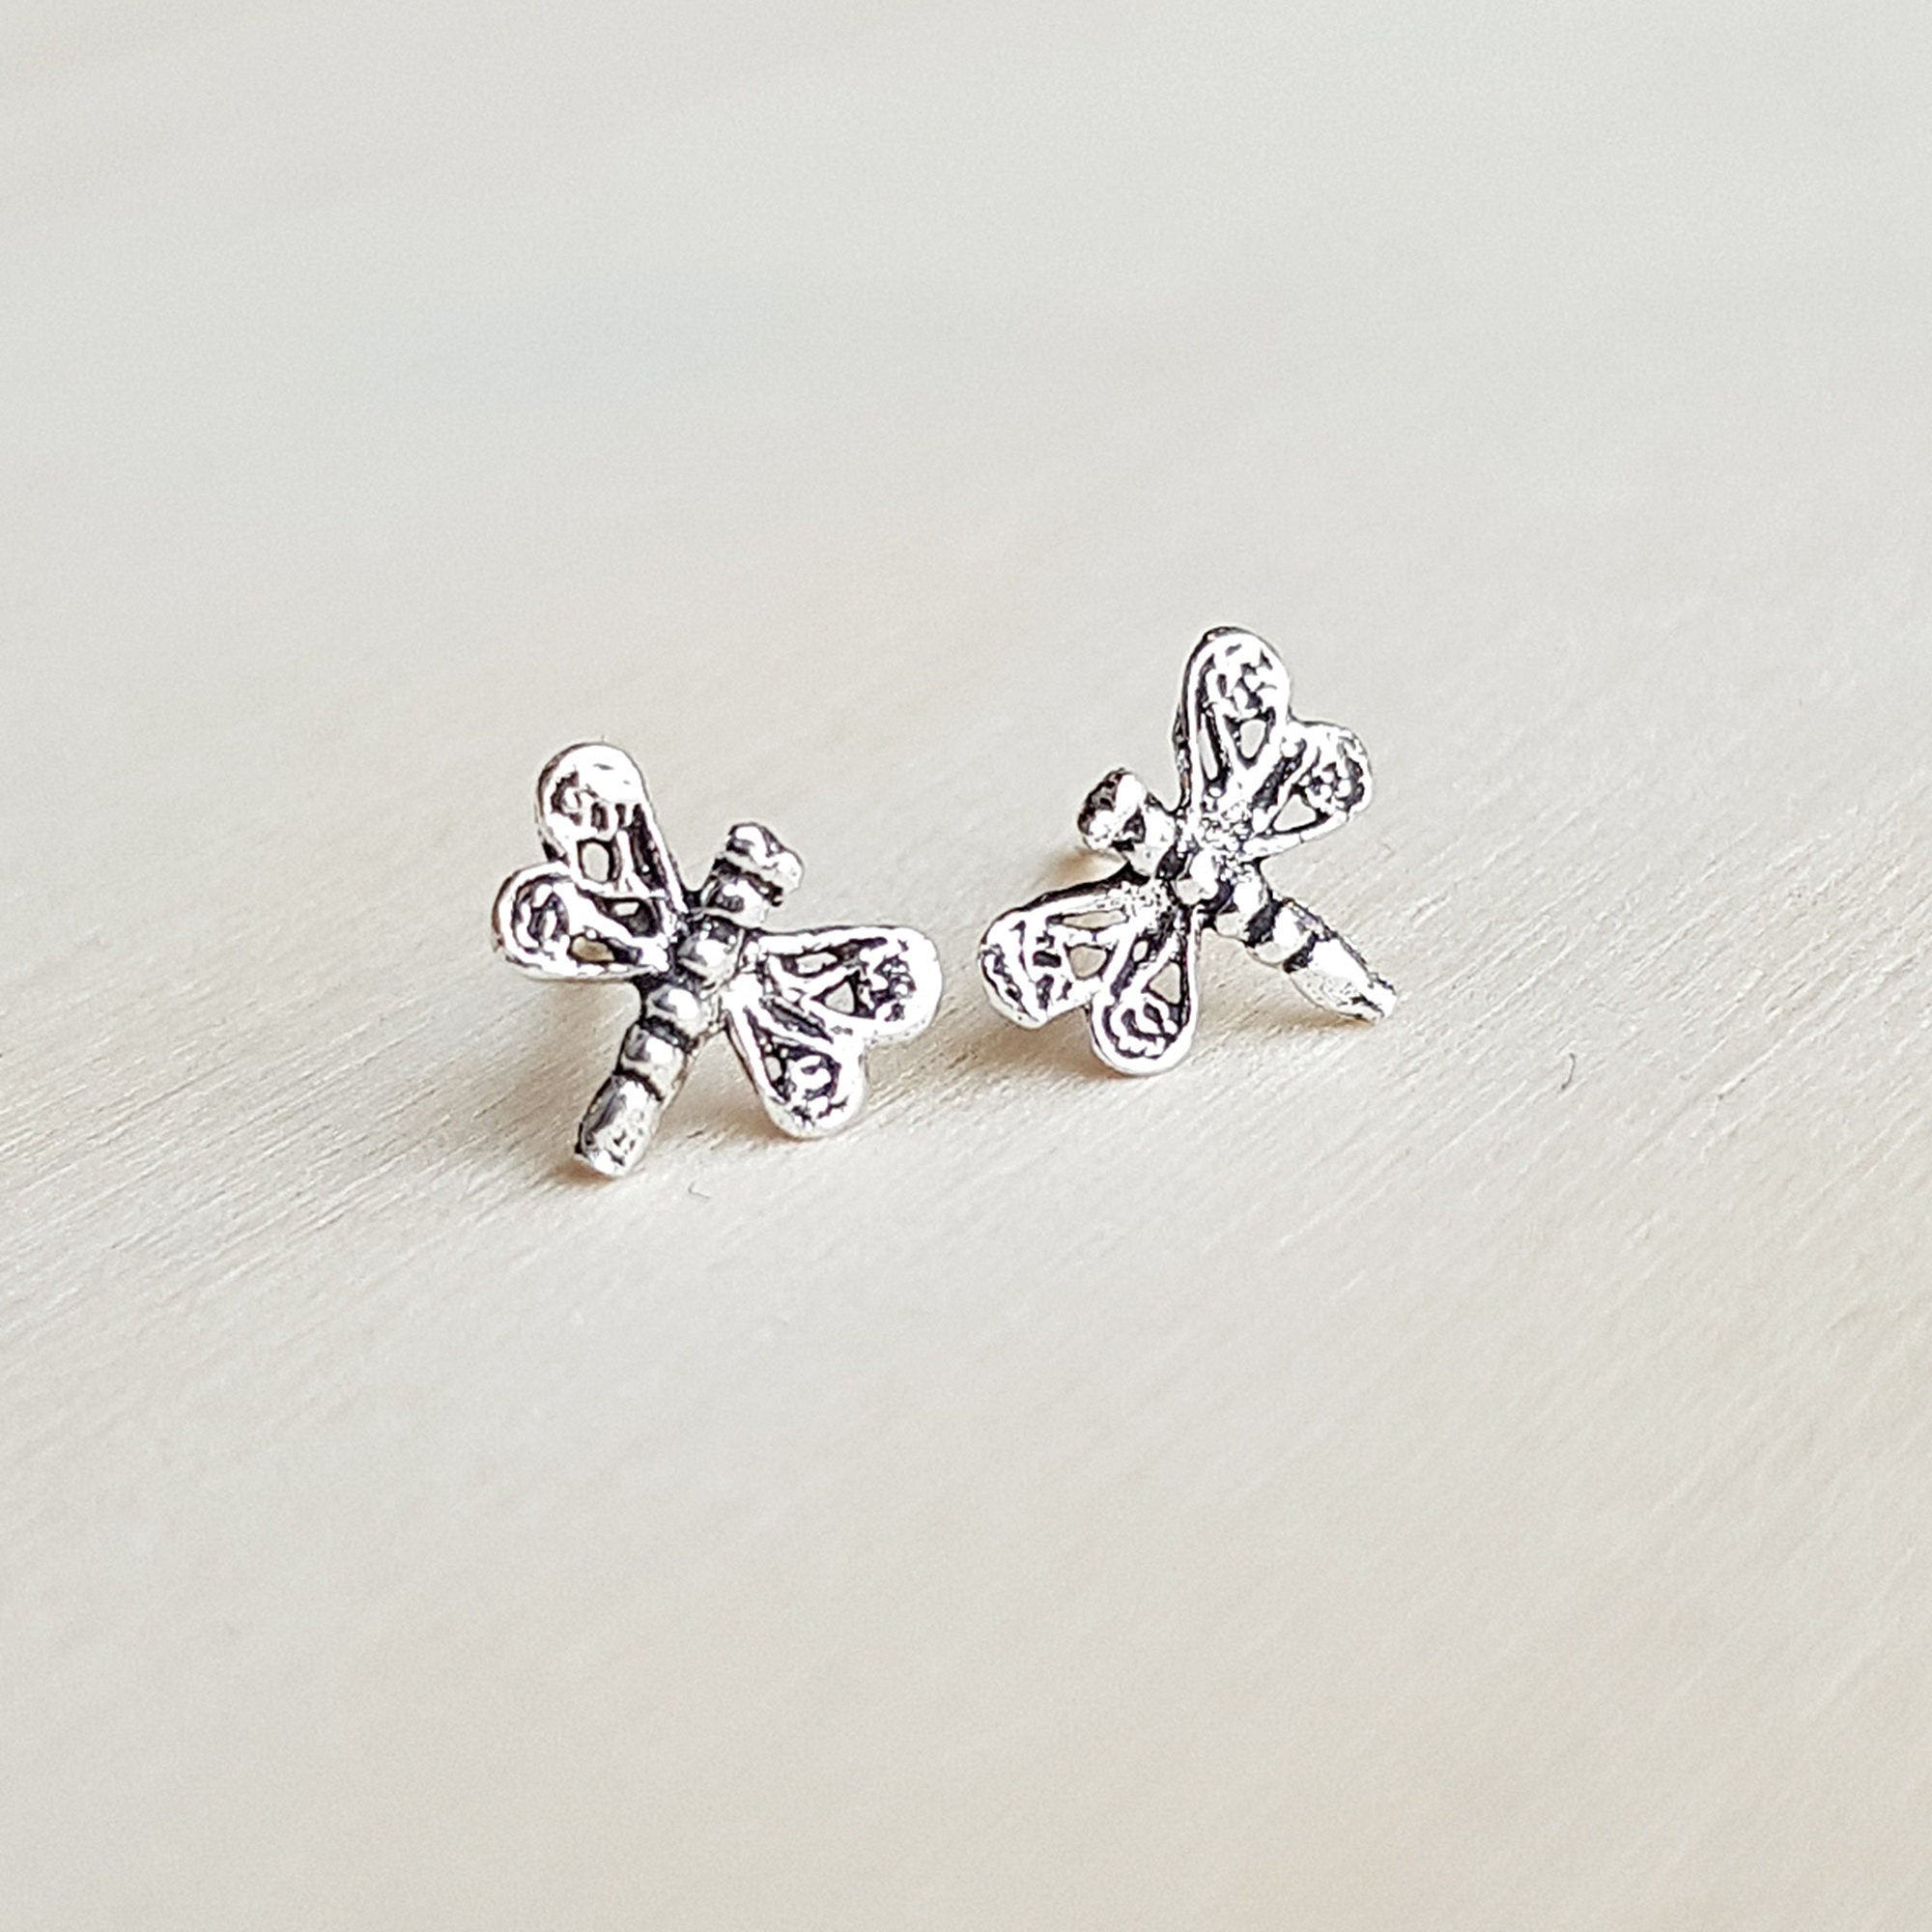 Dragonfly stud earrings 925 Sterling Silver Insect stud | Etsy